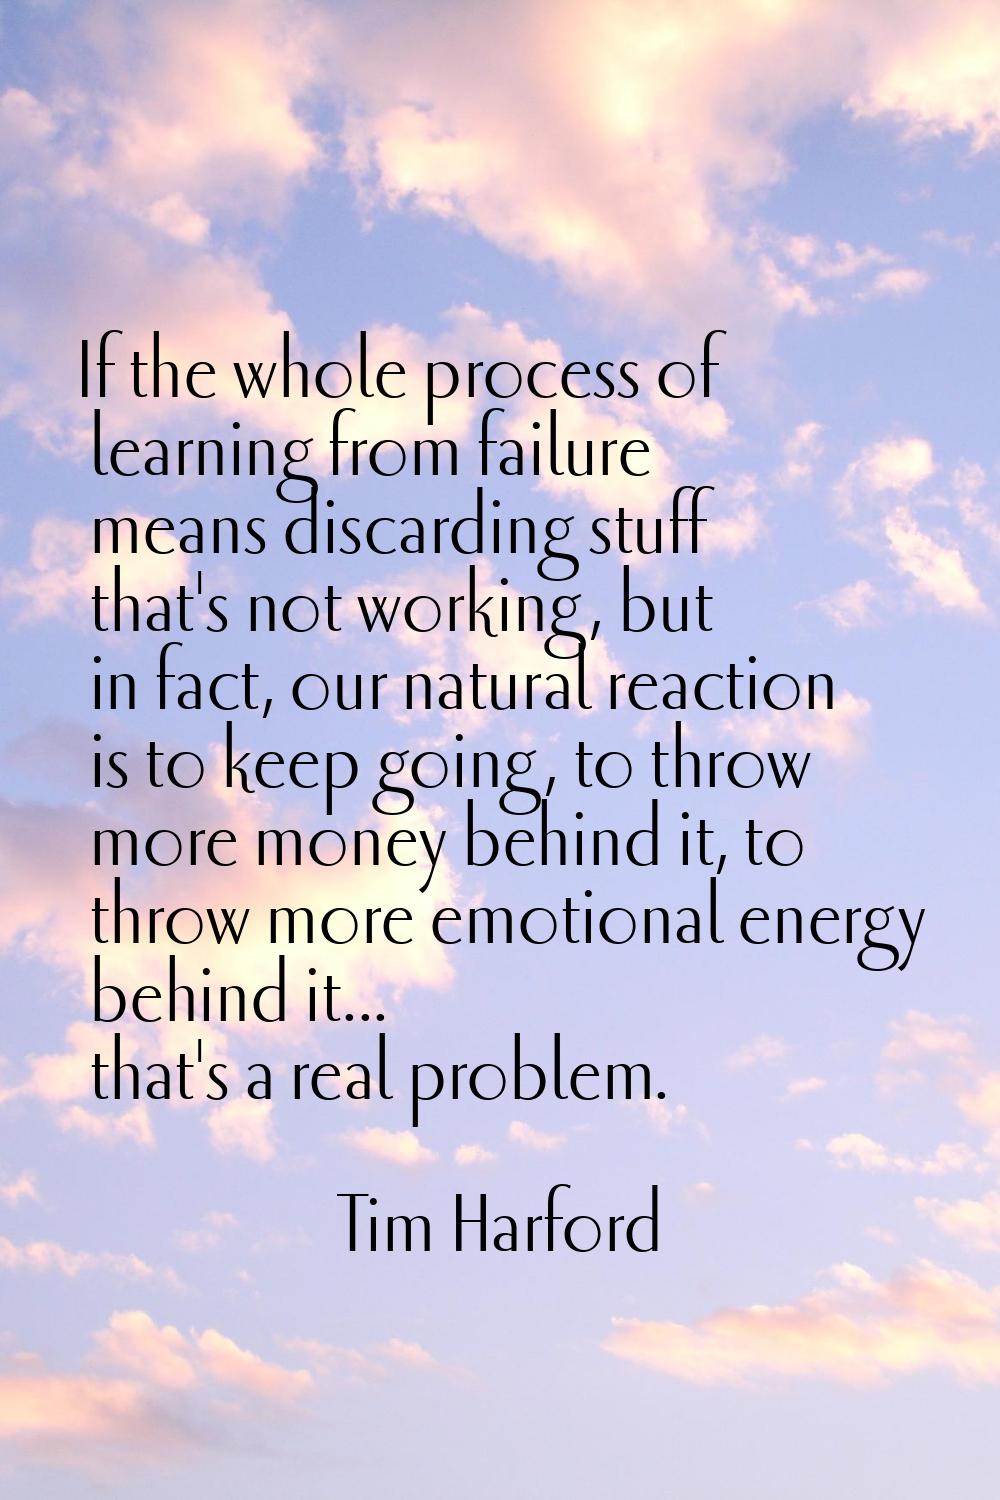 If the whole process of learning from failure means discarding stuff that's not working, but in fac